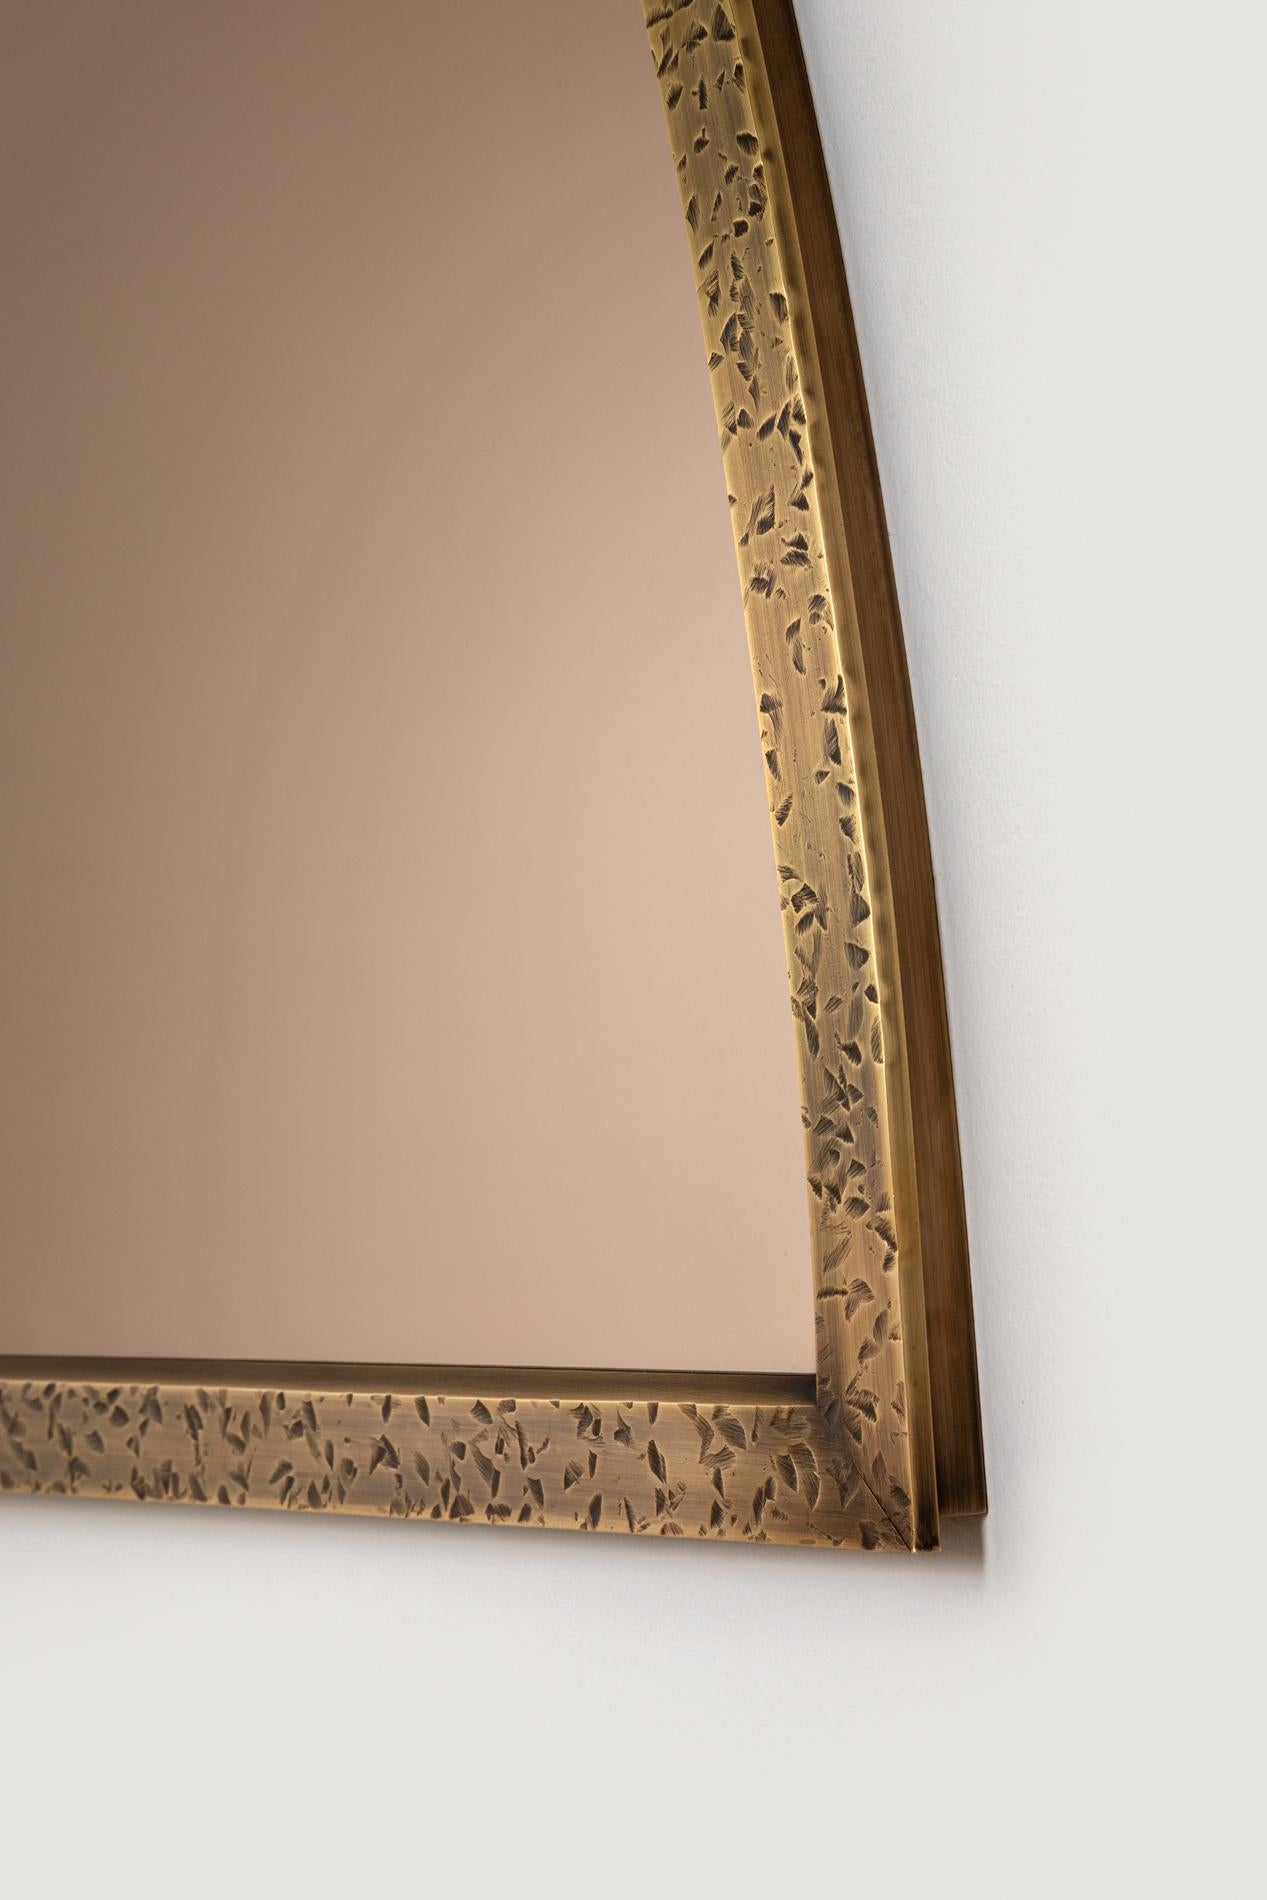 Mirooo Limited Edition Mirror by Moure Studio For Sale 2